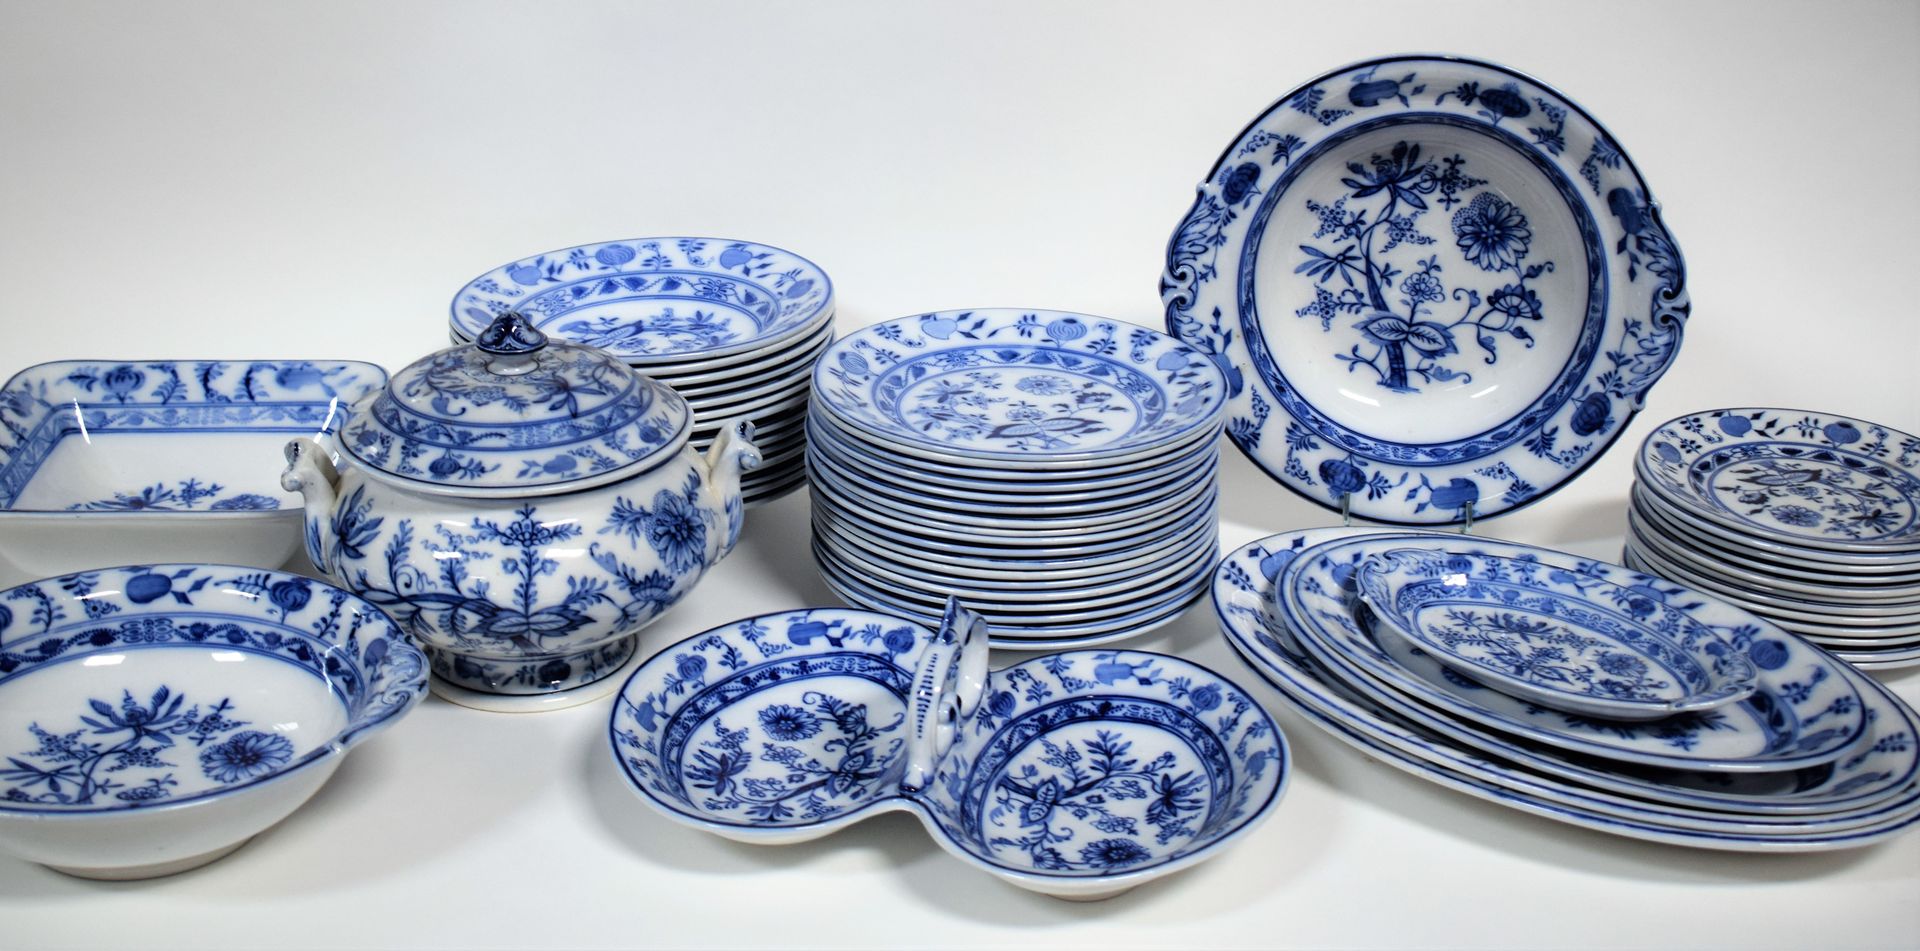 Null (VILLEROY BOCH) Dresden service with blue onion decoration, includes: 18 di&hellip;